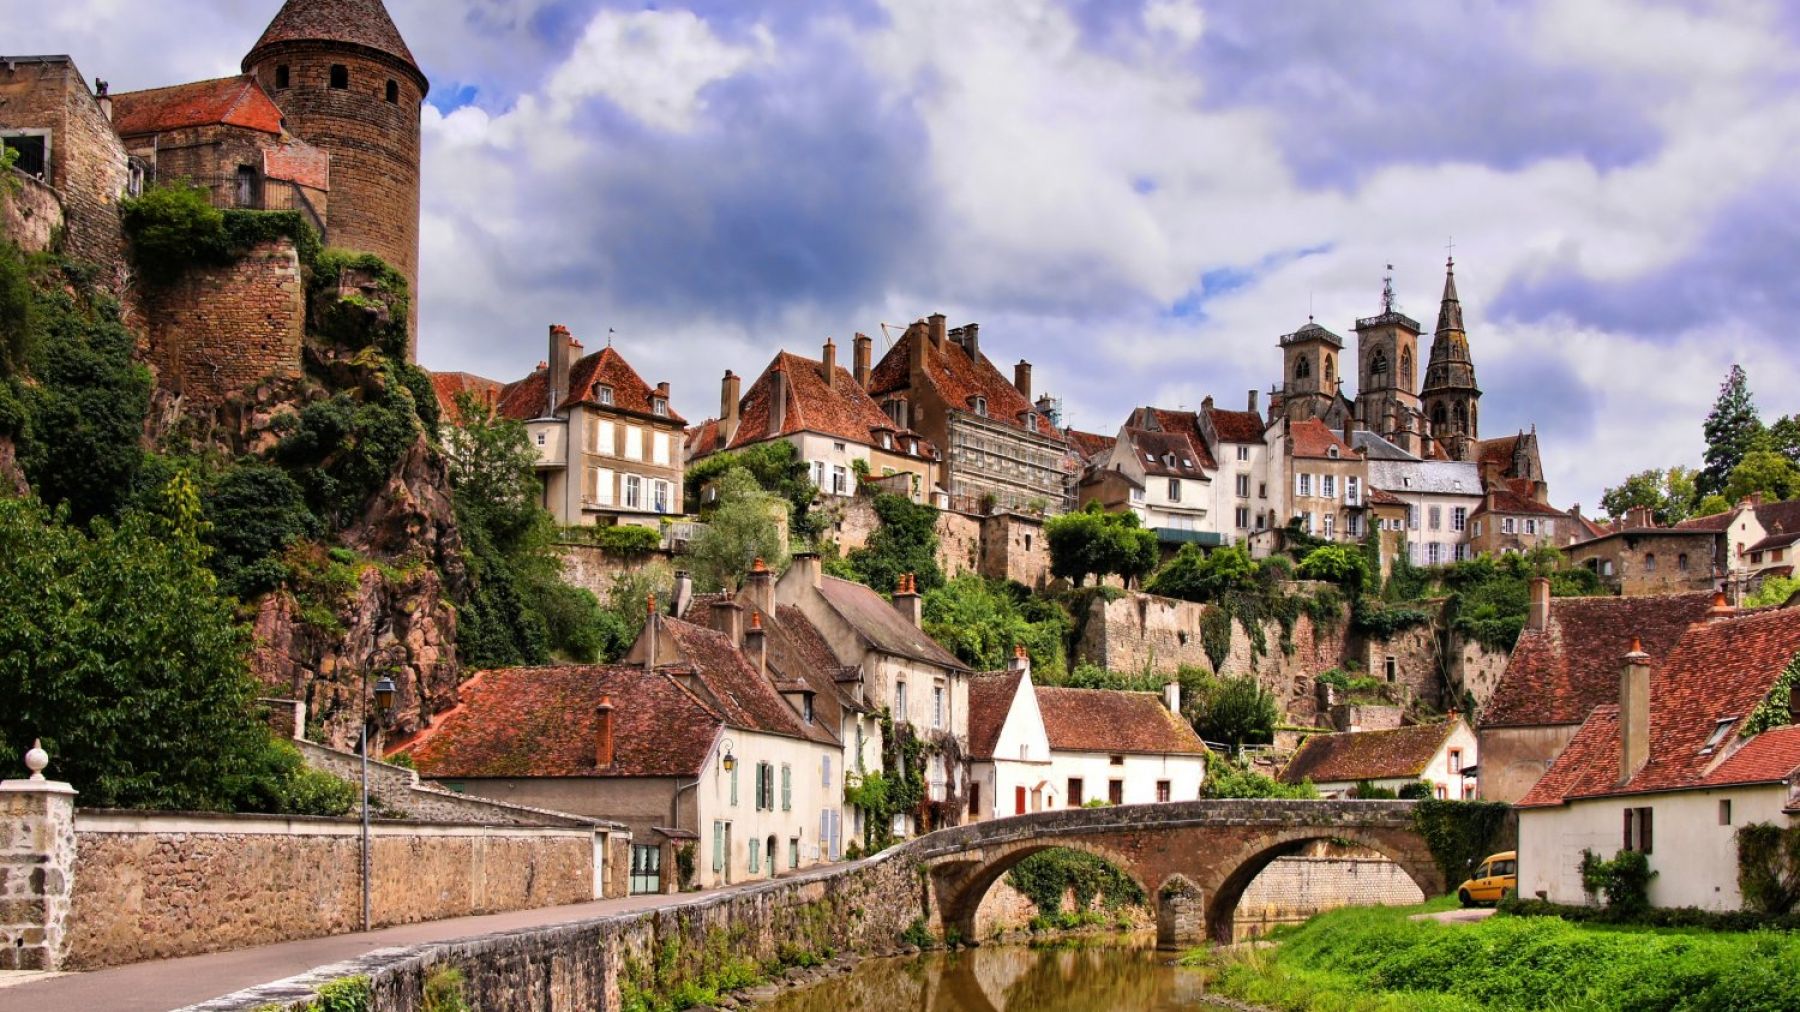 Be dazzled by southern Burgundy's heritage